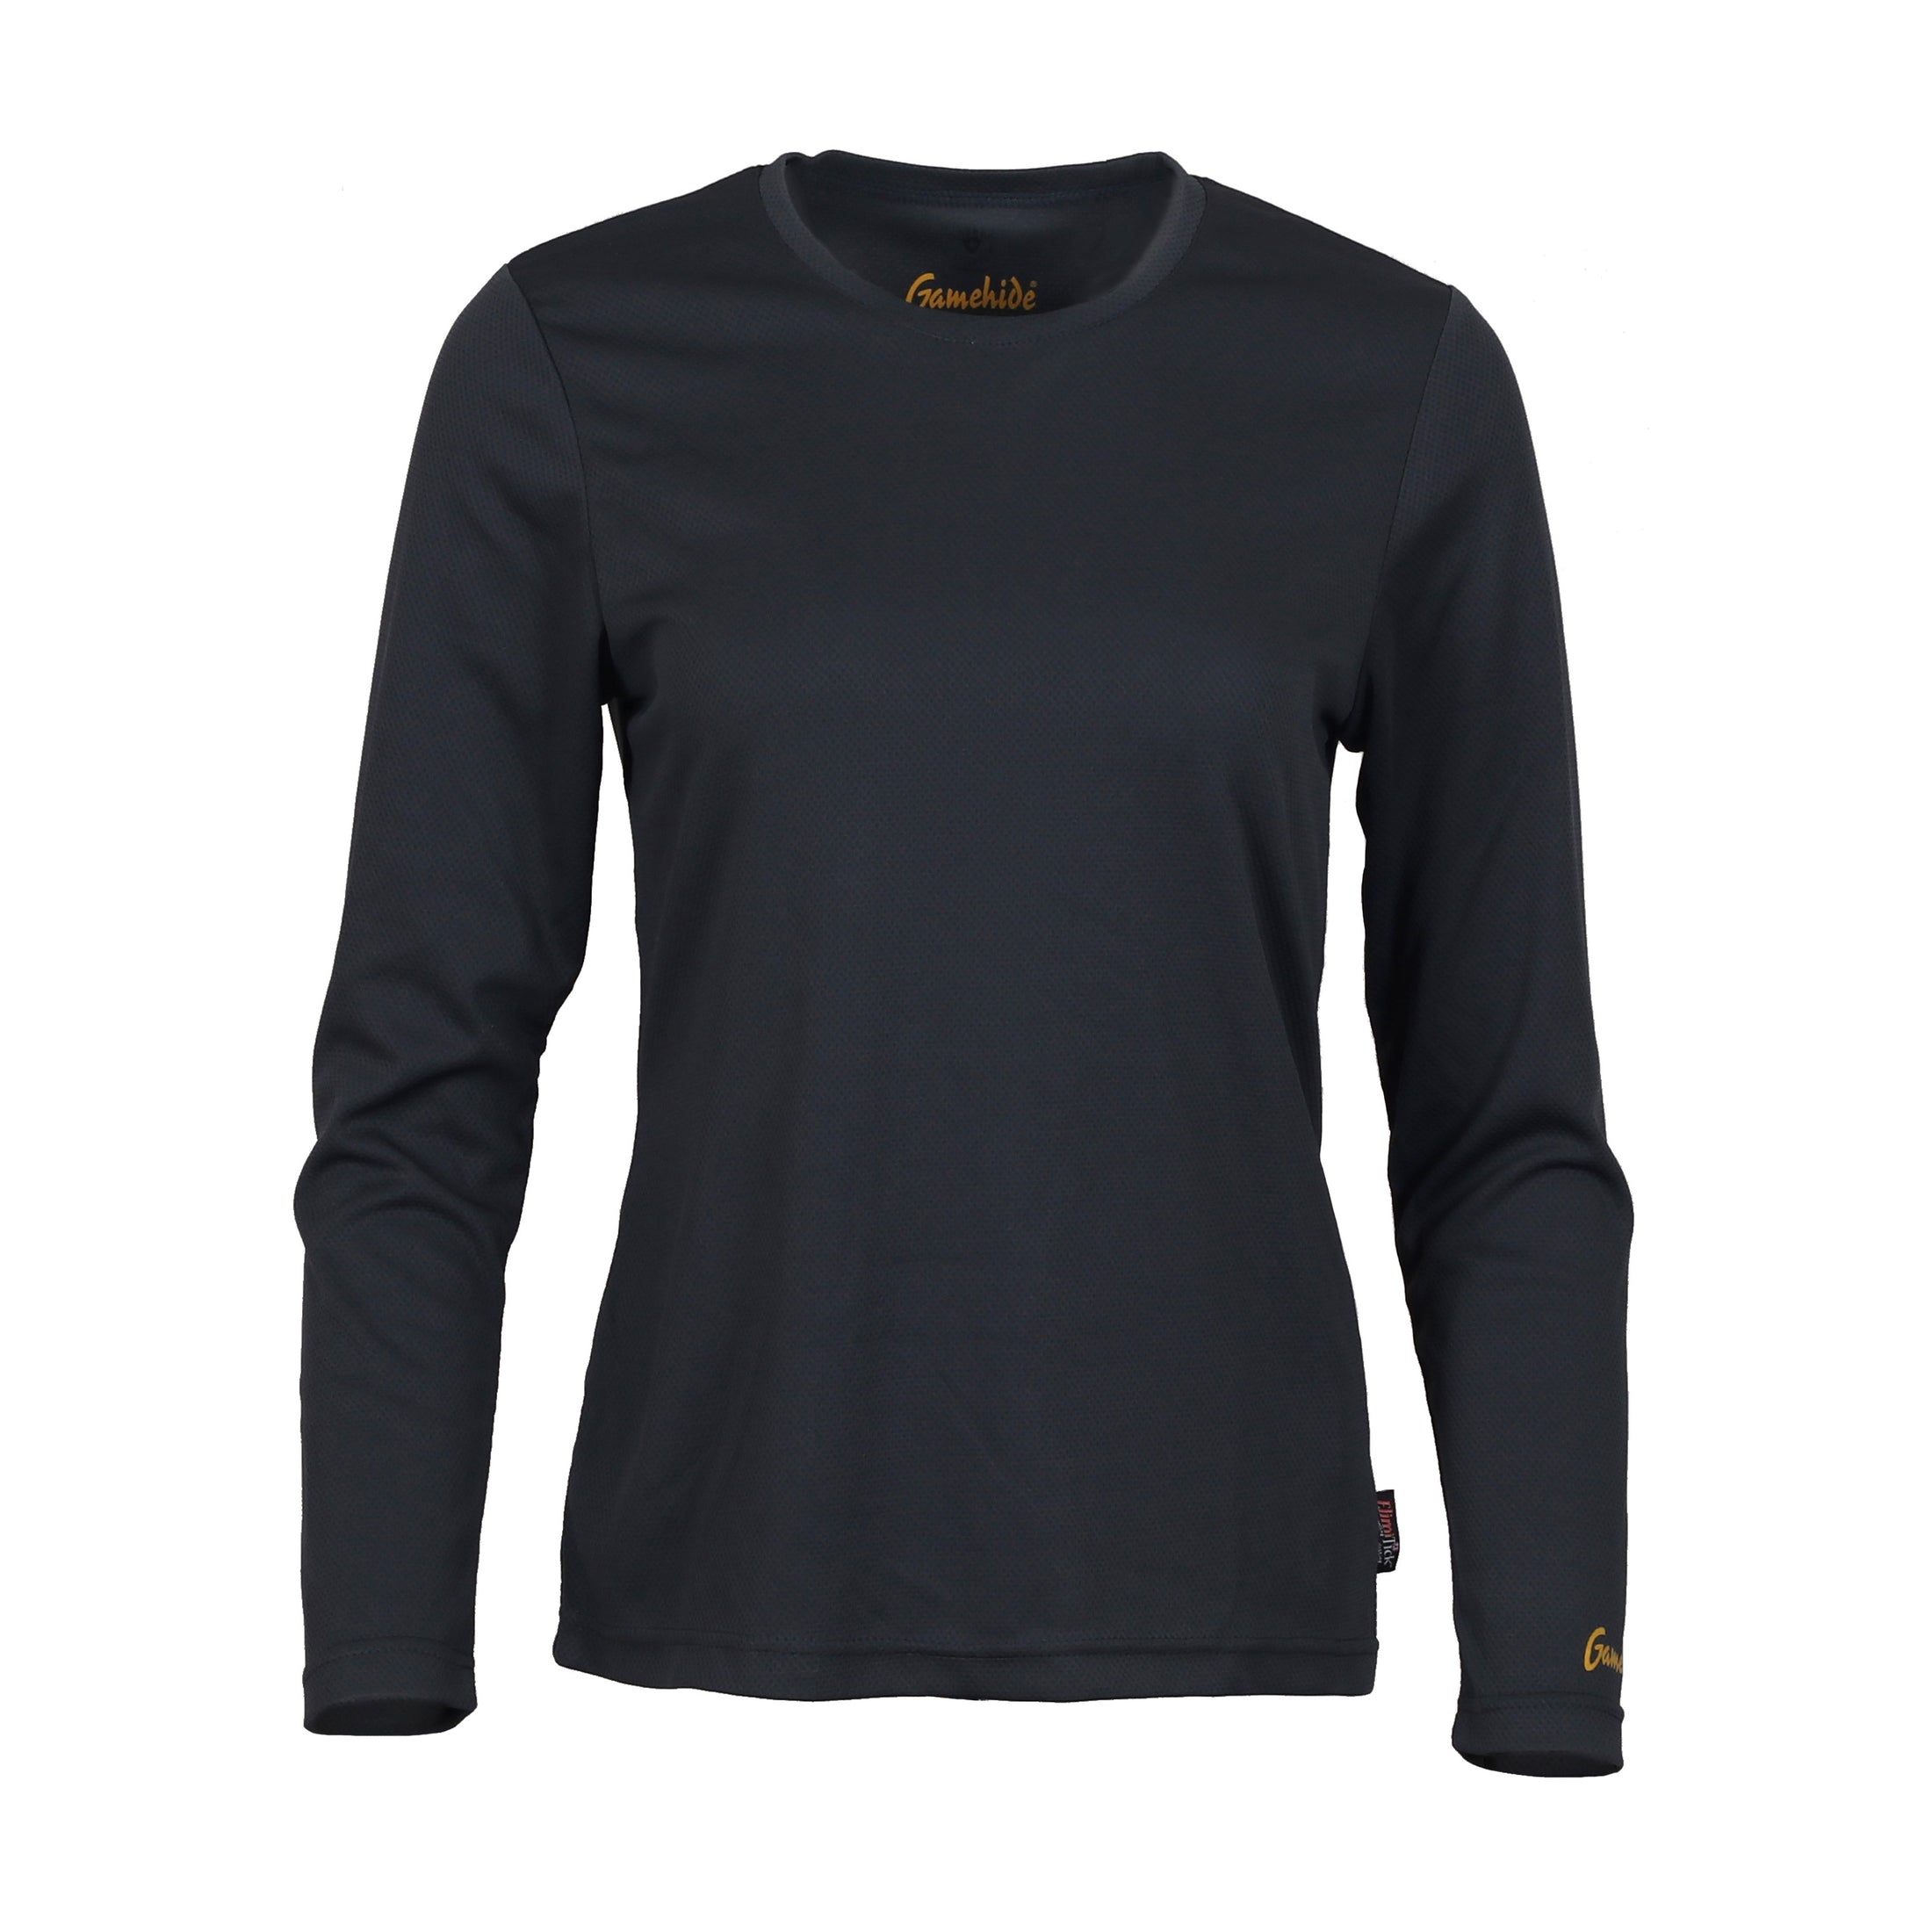 gamehide elimitick womens long sleeve shirt front view (charcoal)